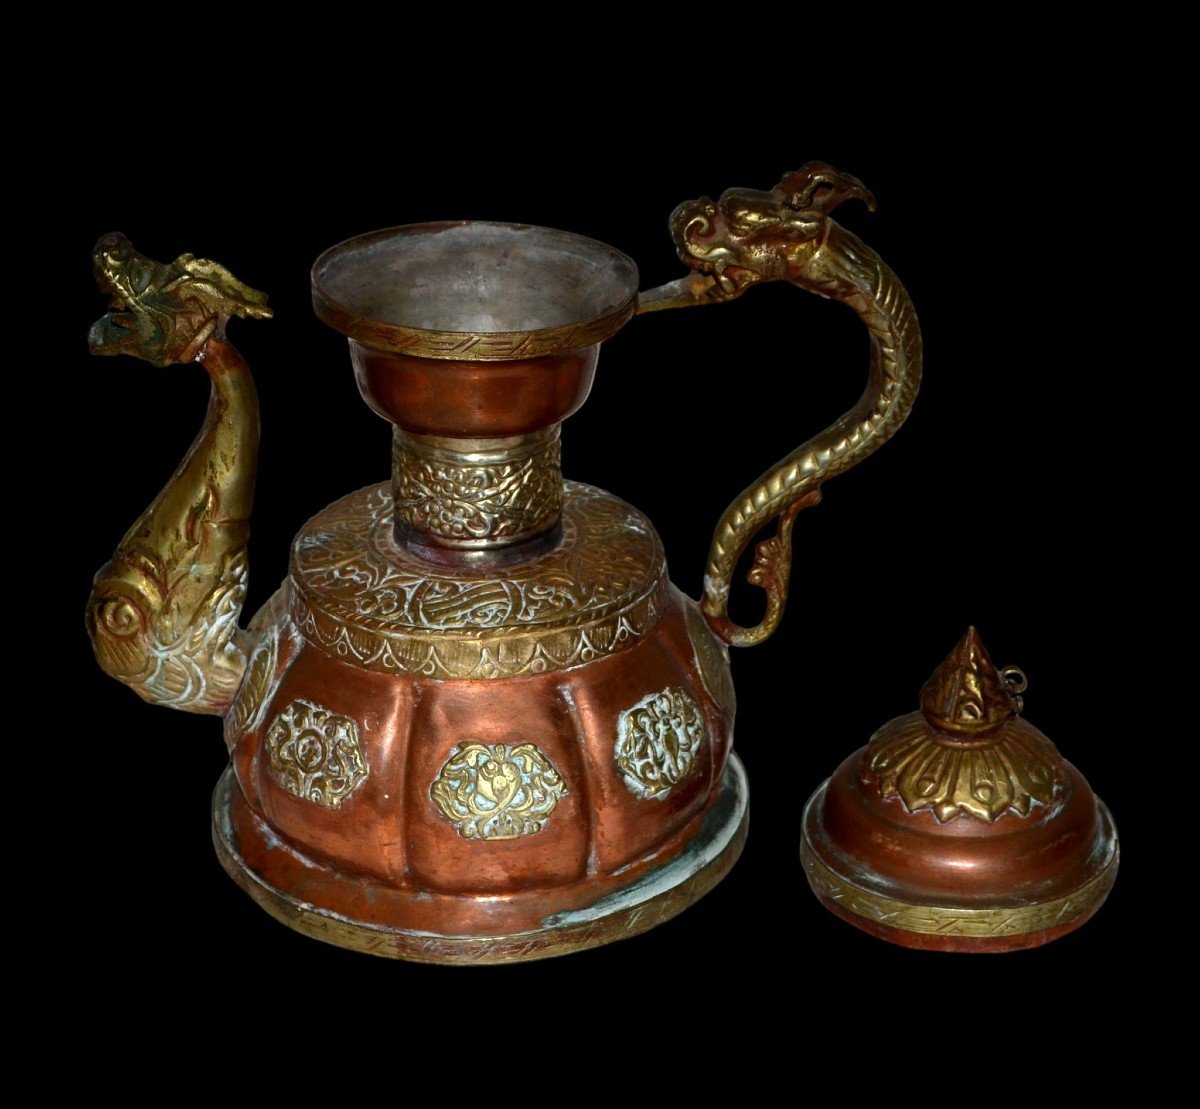 Teapot With Dragons, Tibet, Signs Of Good Omens, Circa 1920/1930 In Collectible Condition-photo-3